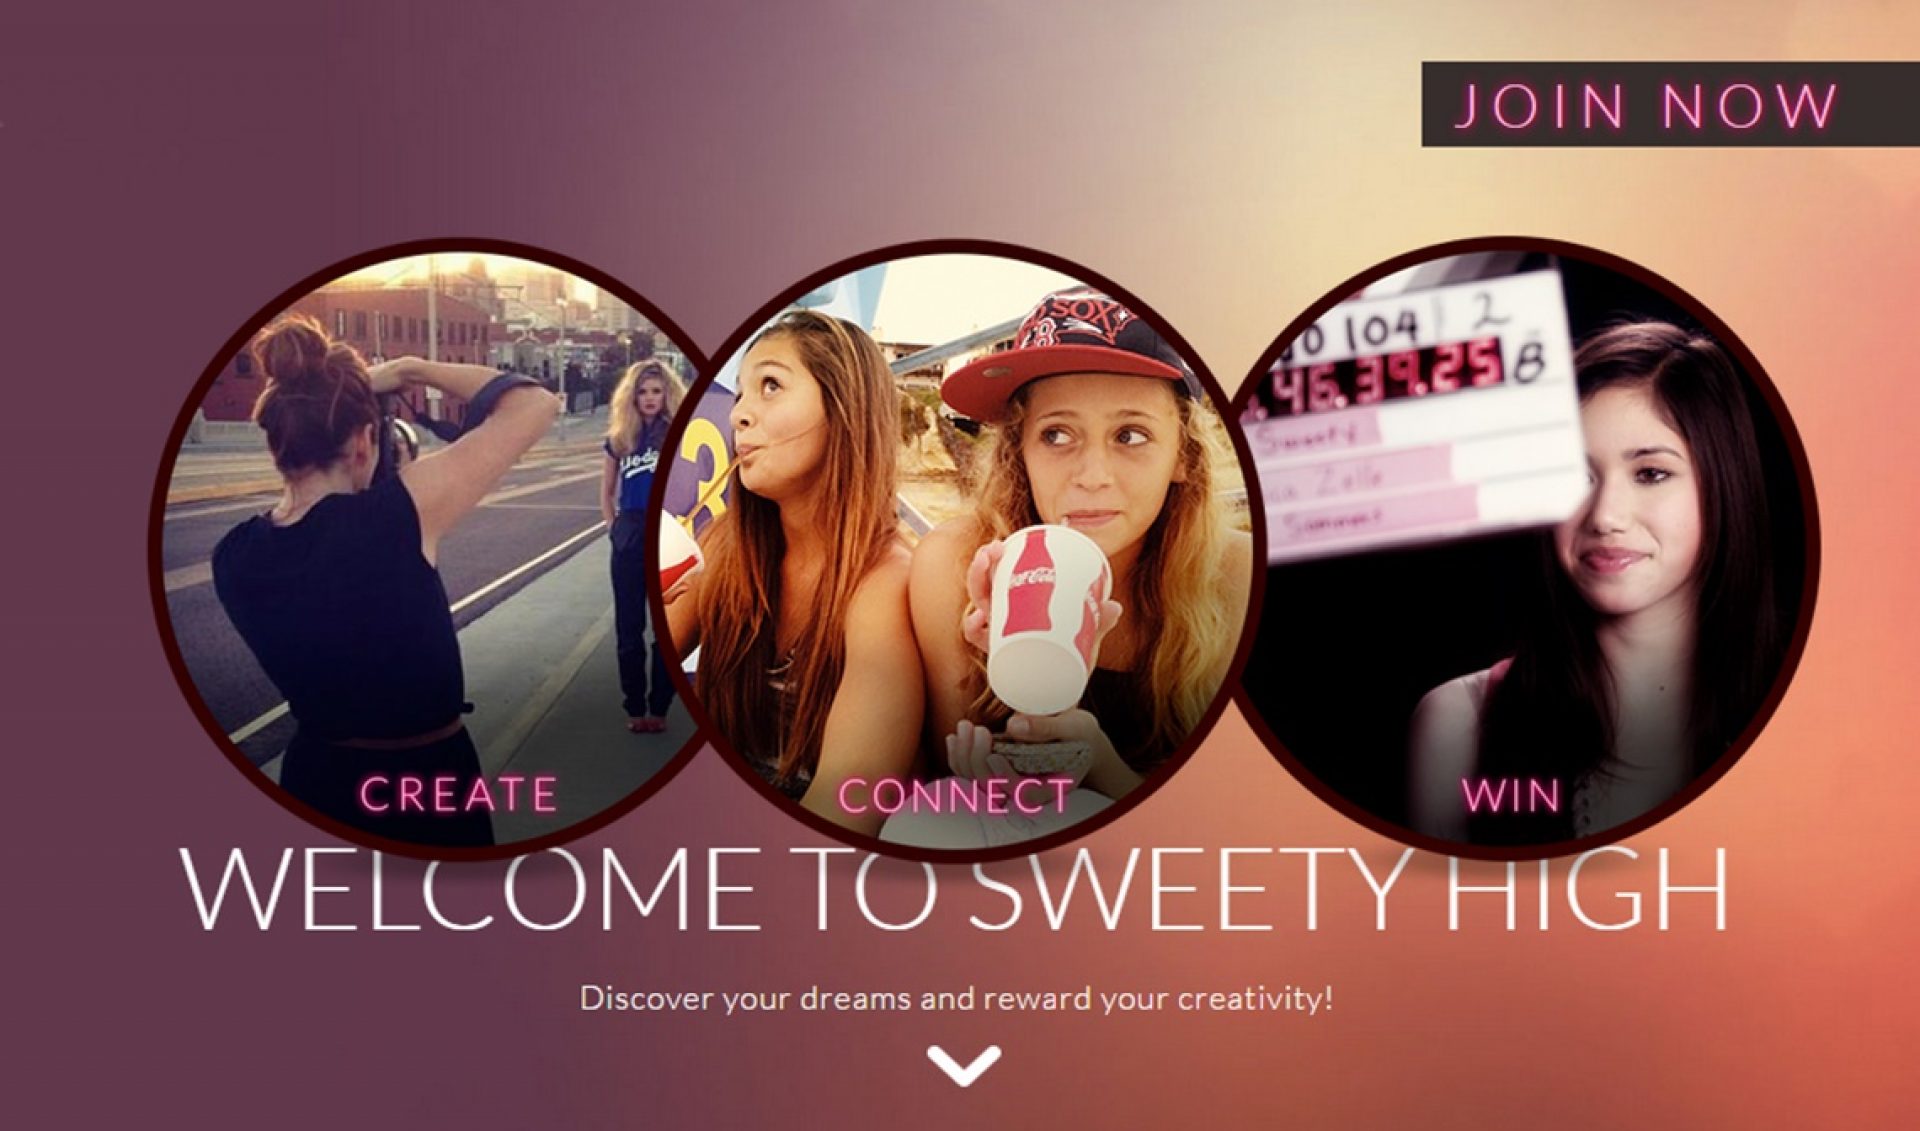 Radio Disney Plans Web Series With “Social World For Girls” Sweety High